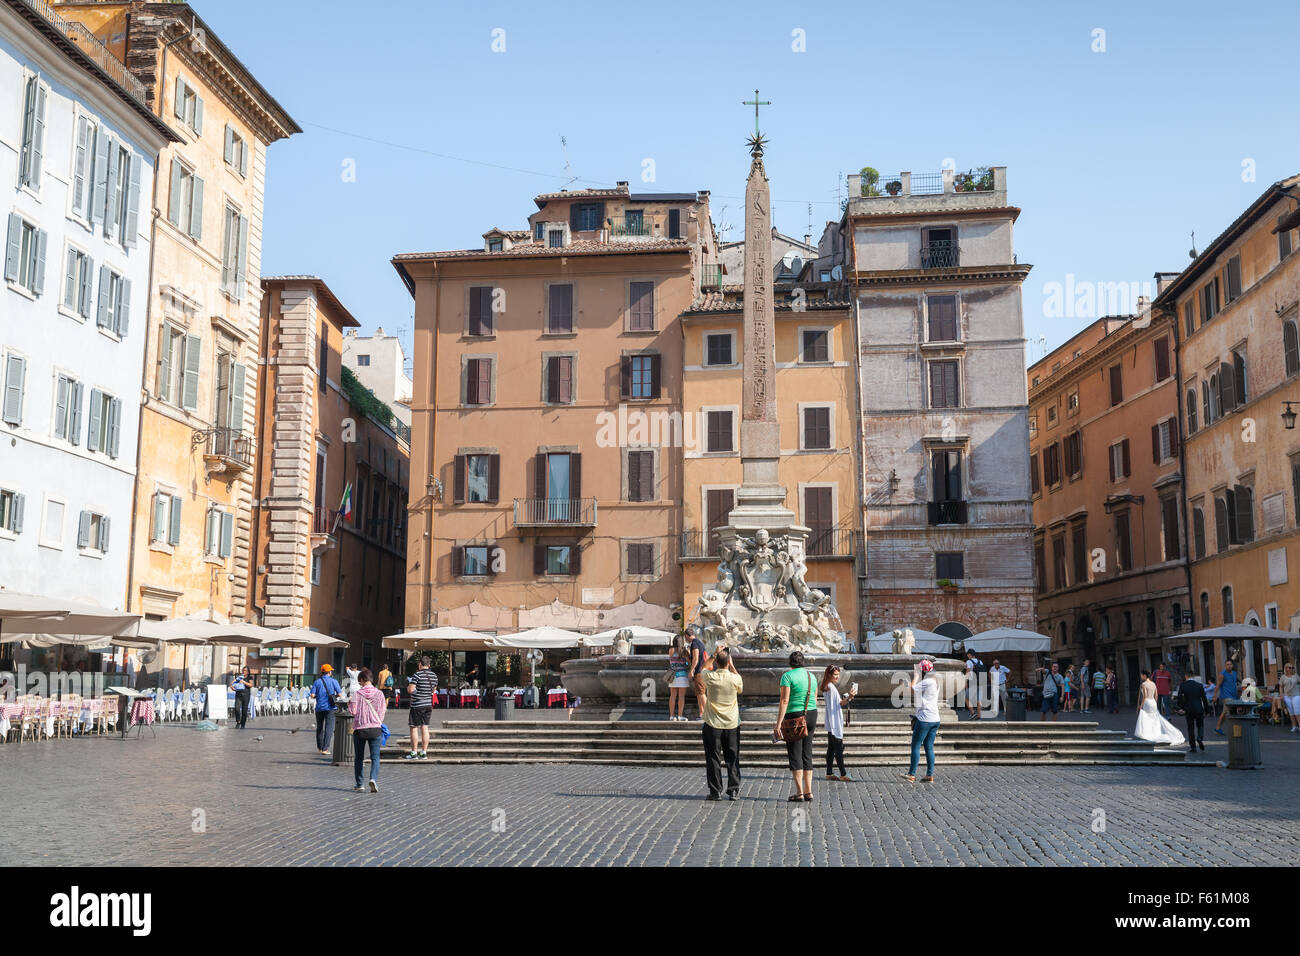 Rome, Italy - August 8, 2015: Street view of the Piazza della Rotonda in Rome opposite of the ancient roman Pantheon Stock Photo